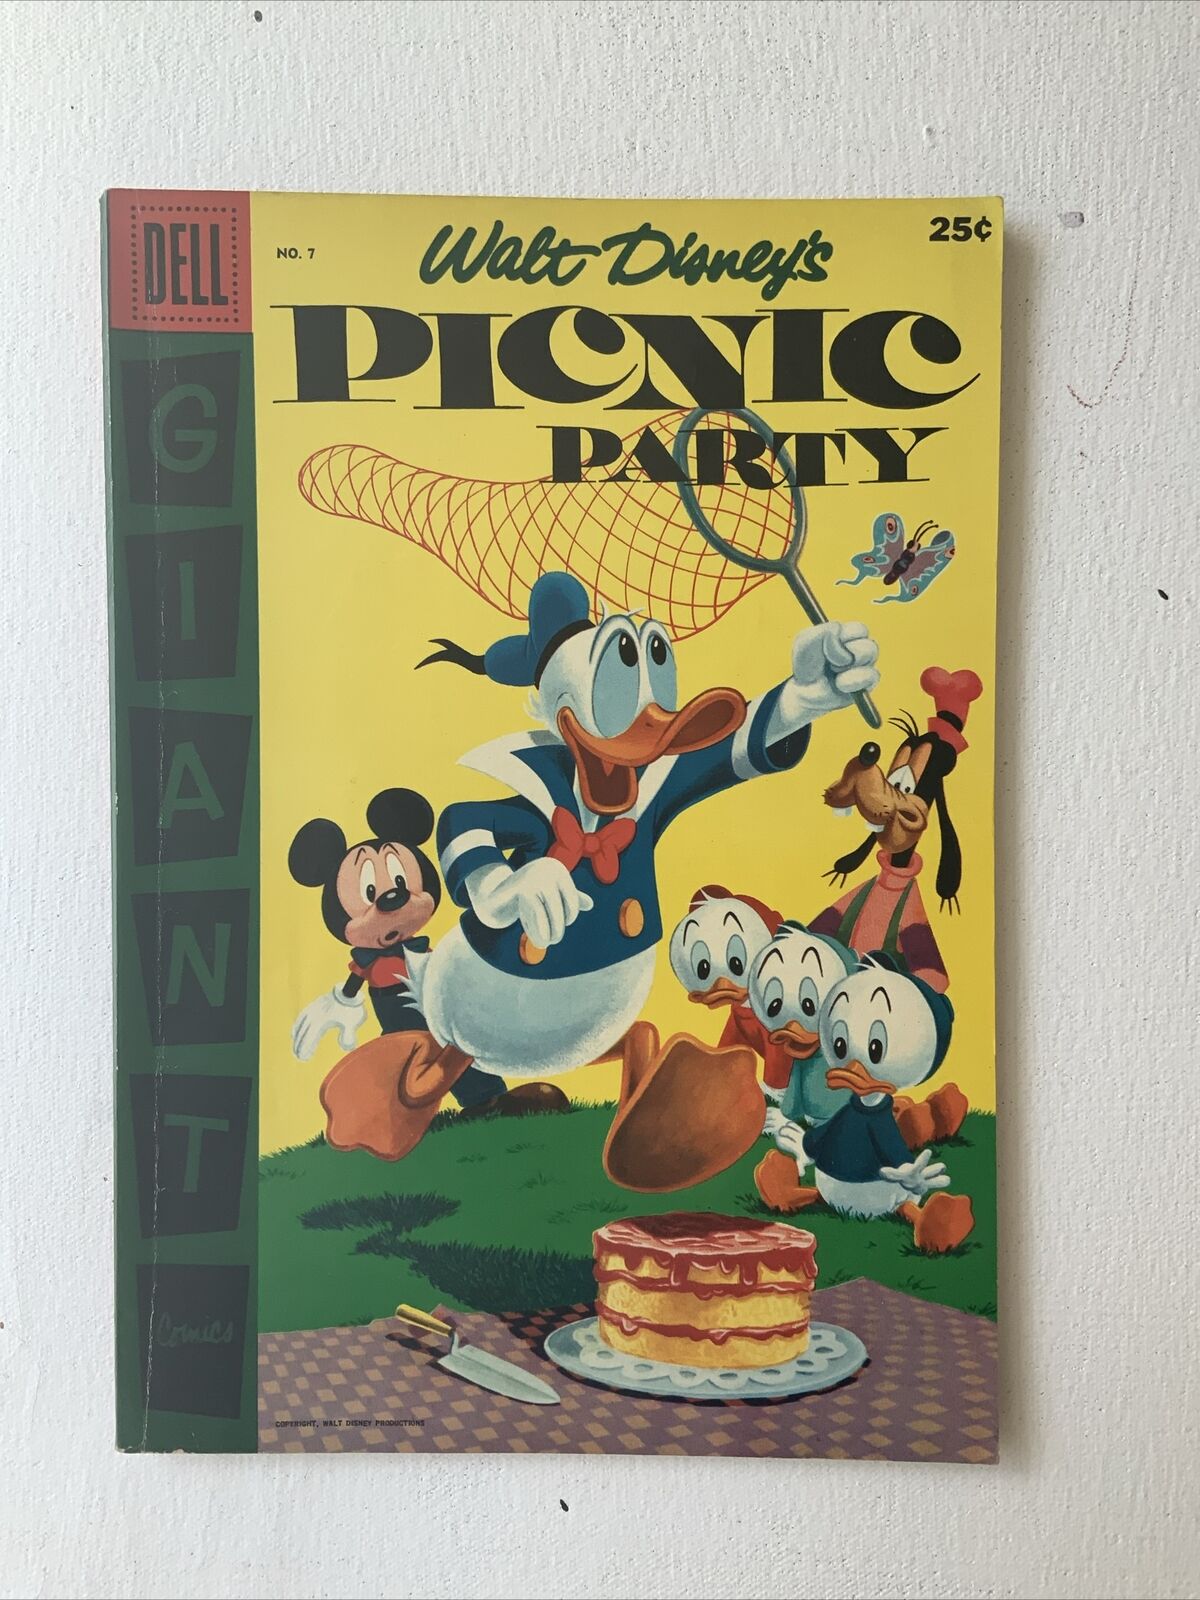 💥 Dell Giant Walt Disneys Picnic Party # 7 1956 Glossy Bright Golden Age Fine